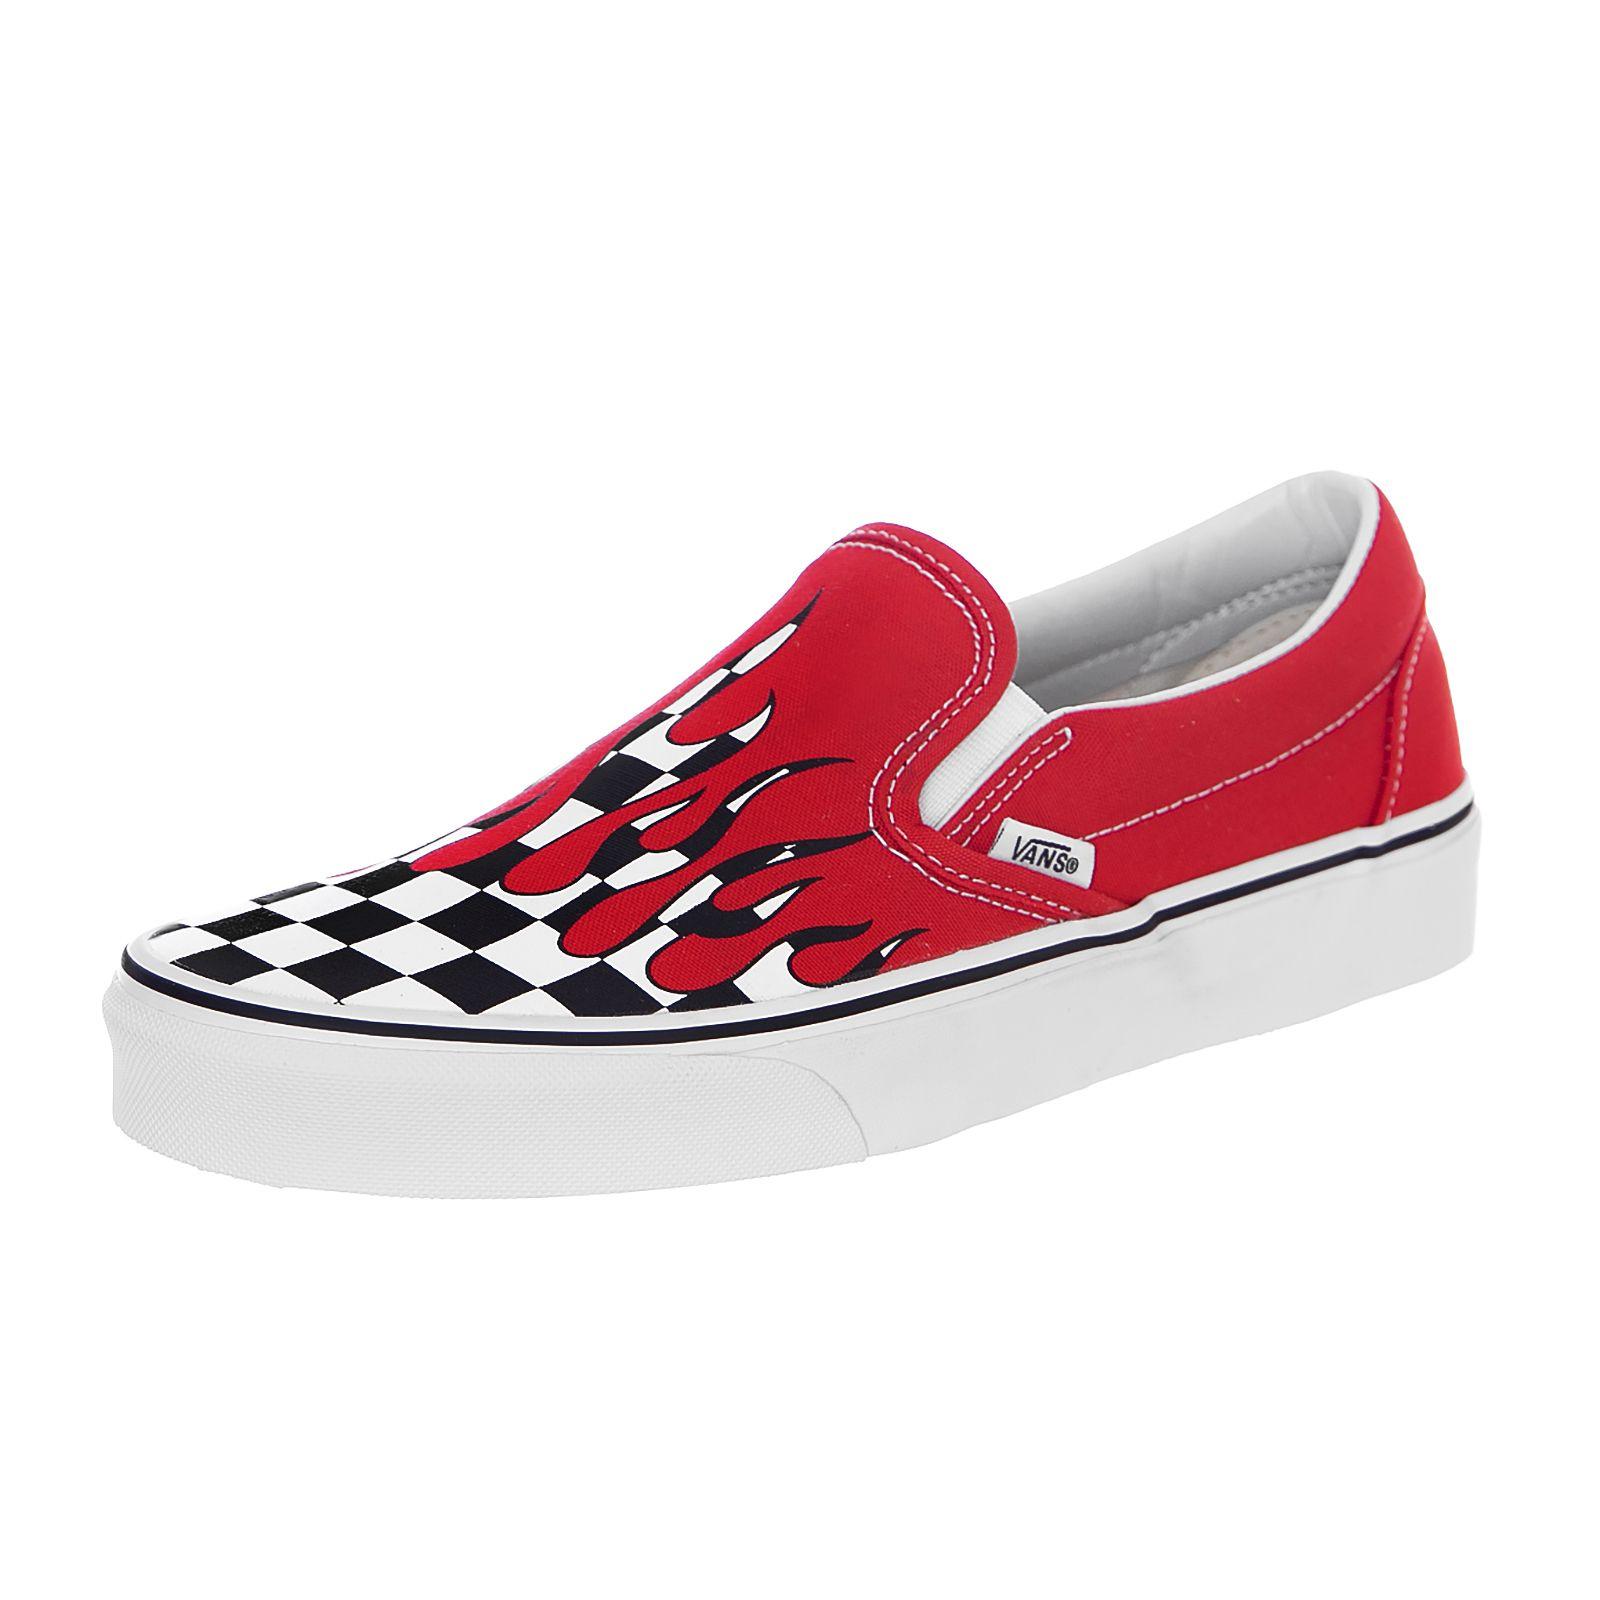 Red Checkered Vans Logo - Vans Sneakers Classic Slip On (Checker Flame) Racing Red Rosso